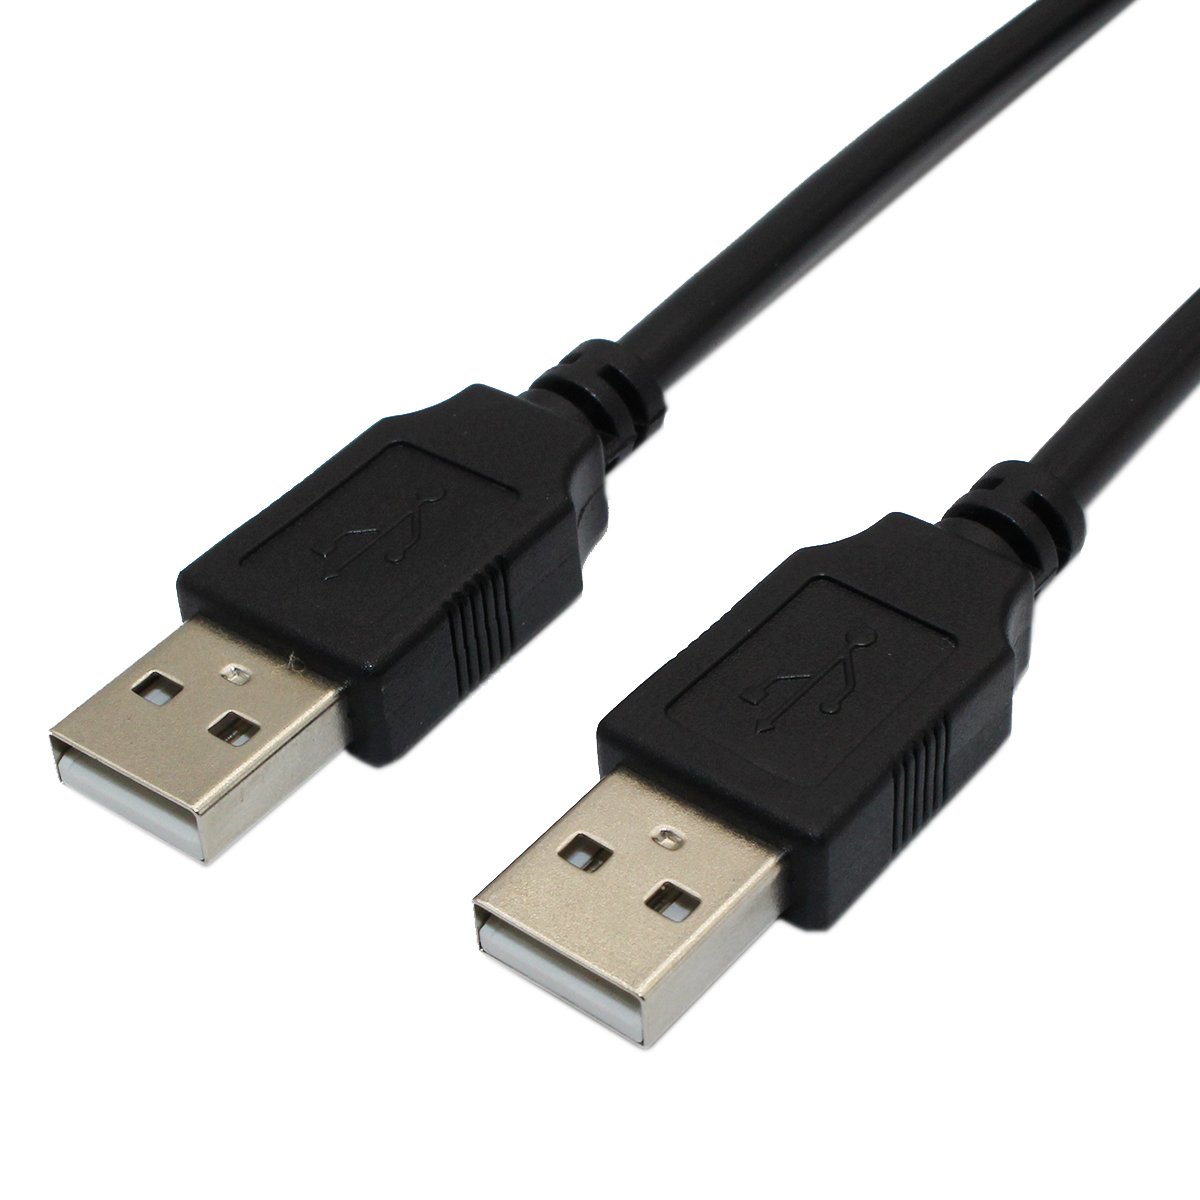 Choice USB-A Male to Male USB 2.0 Cable 1.8m 6ft